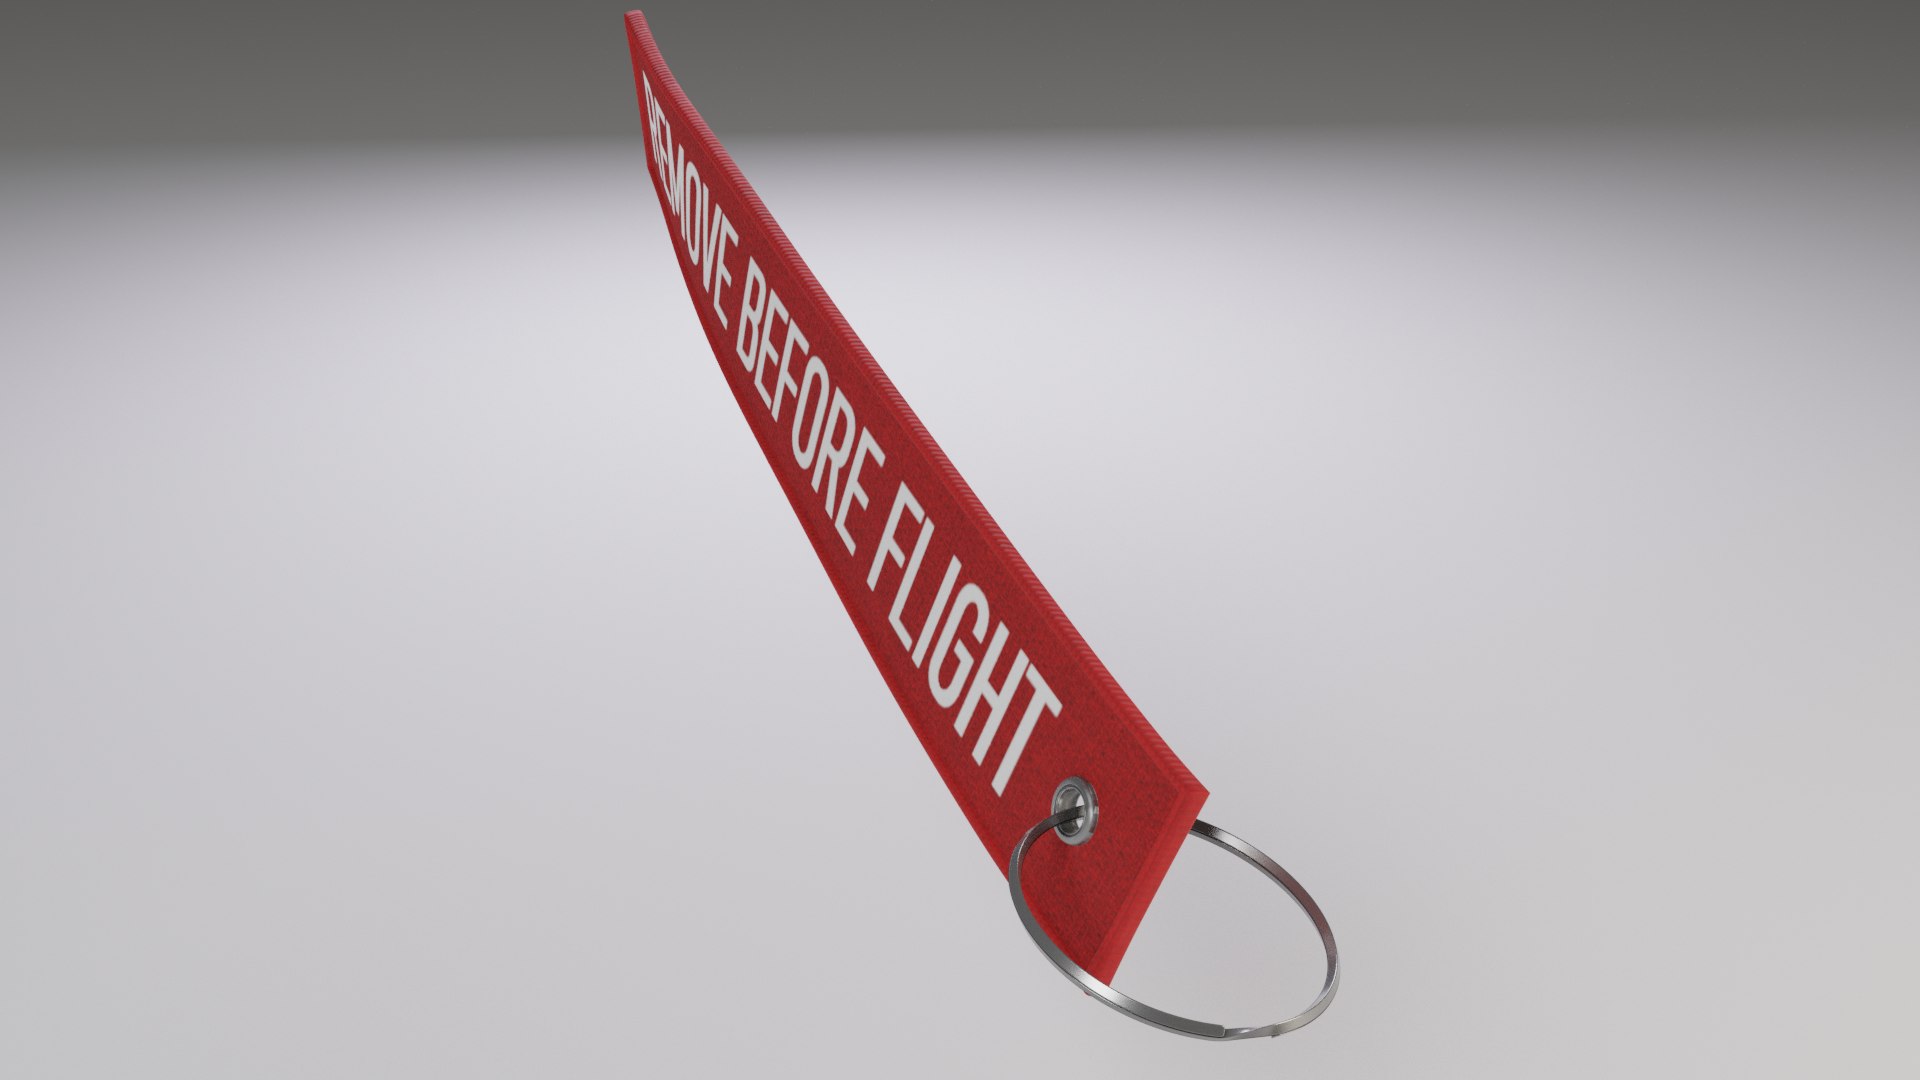 Remove Before Flight Safety Tag model - TurboSquid 1857534